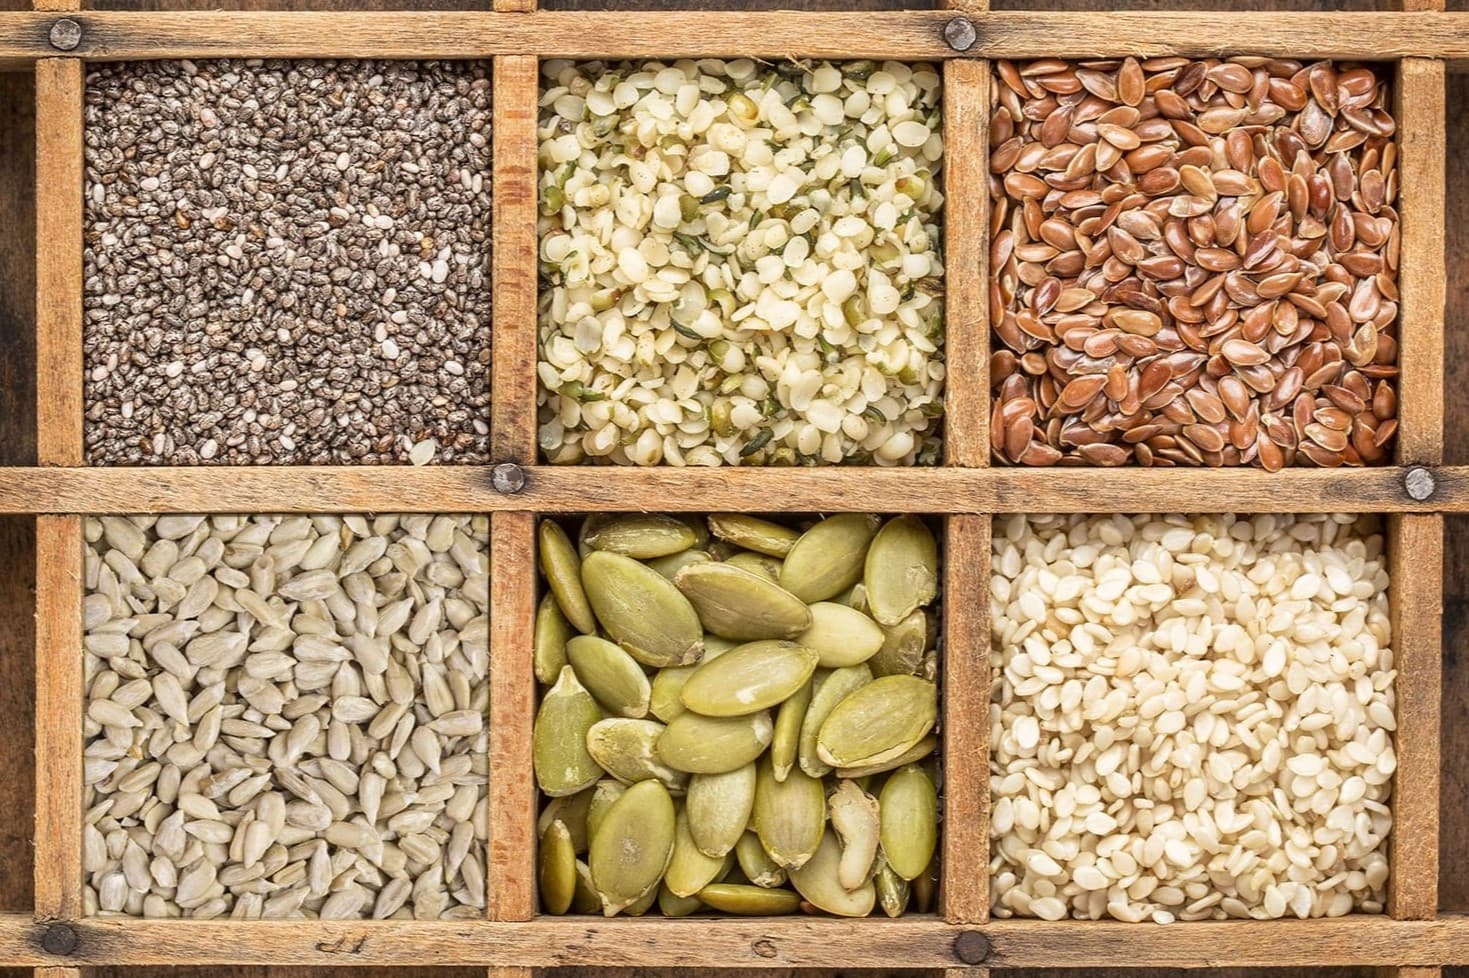 What Seeds Are Good For You